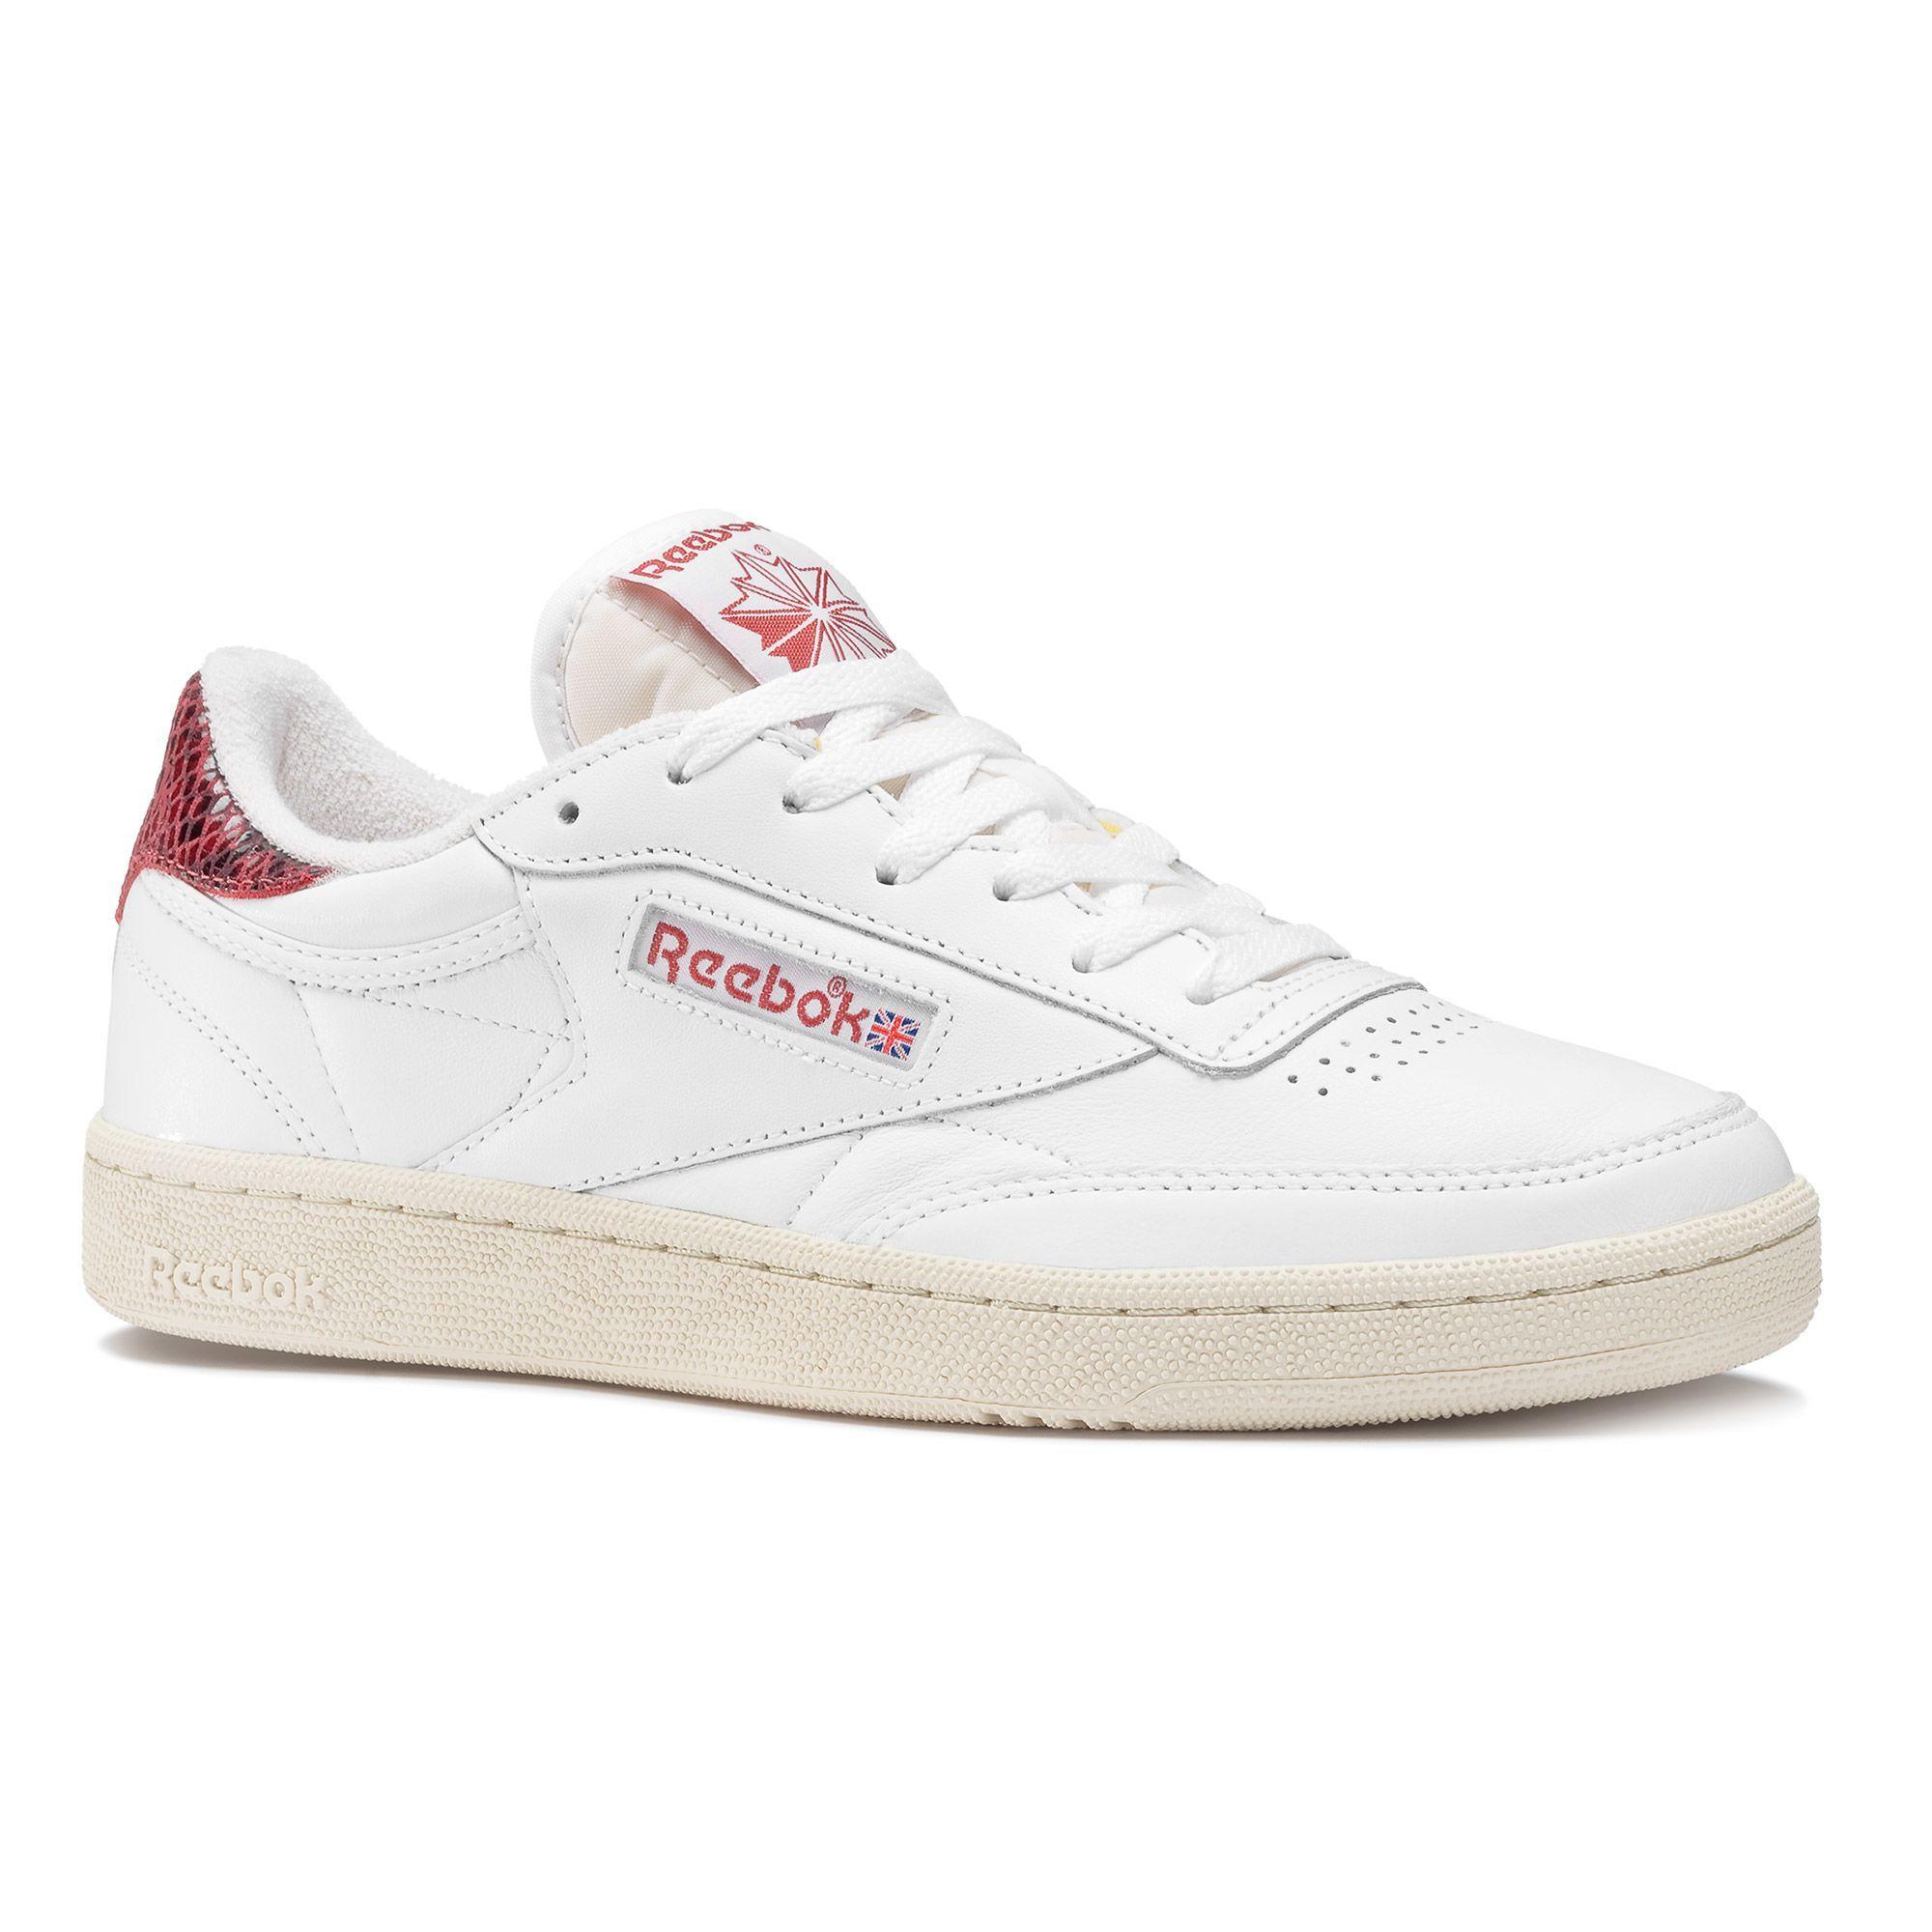 Red White and vs Logo - Cheap Reebok Club C 85 Vs - Womens Classic Shoes Sneakers White/Red ...